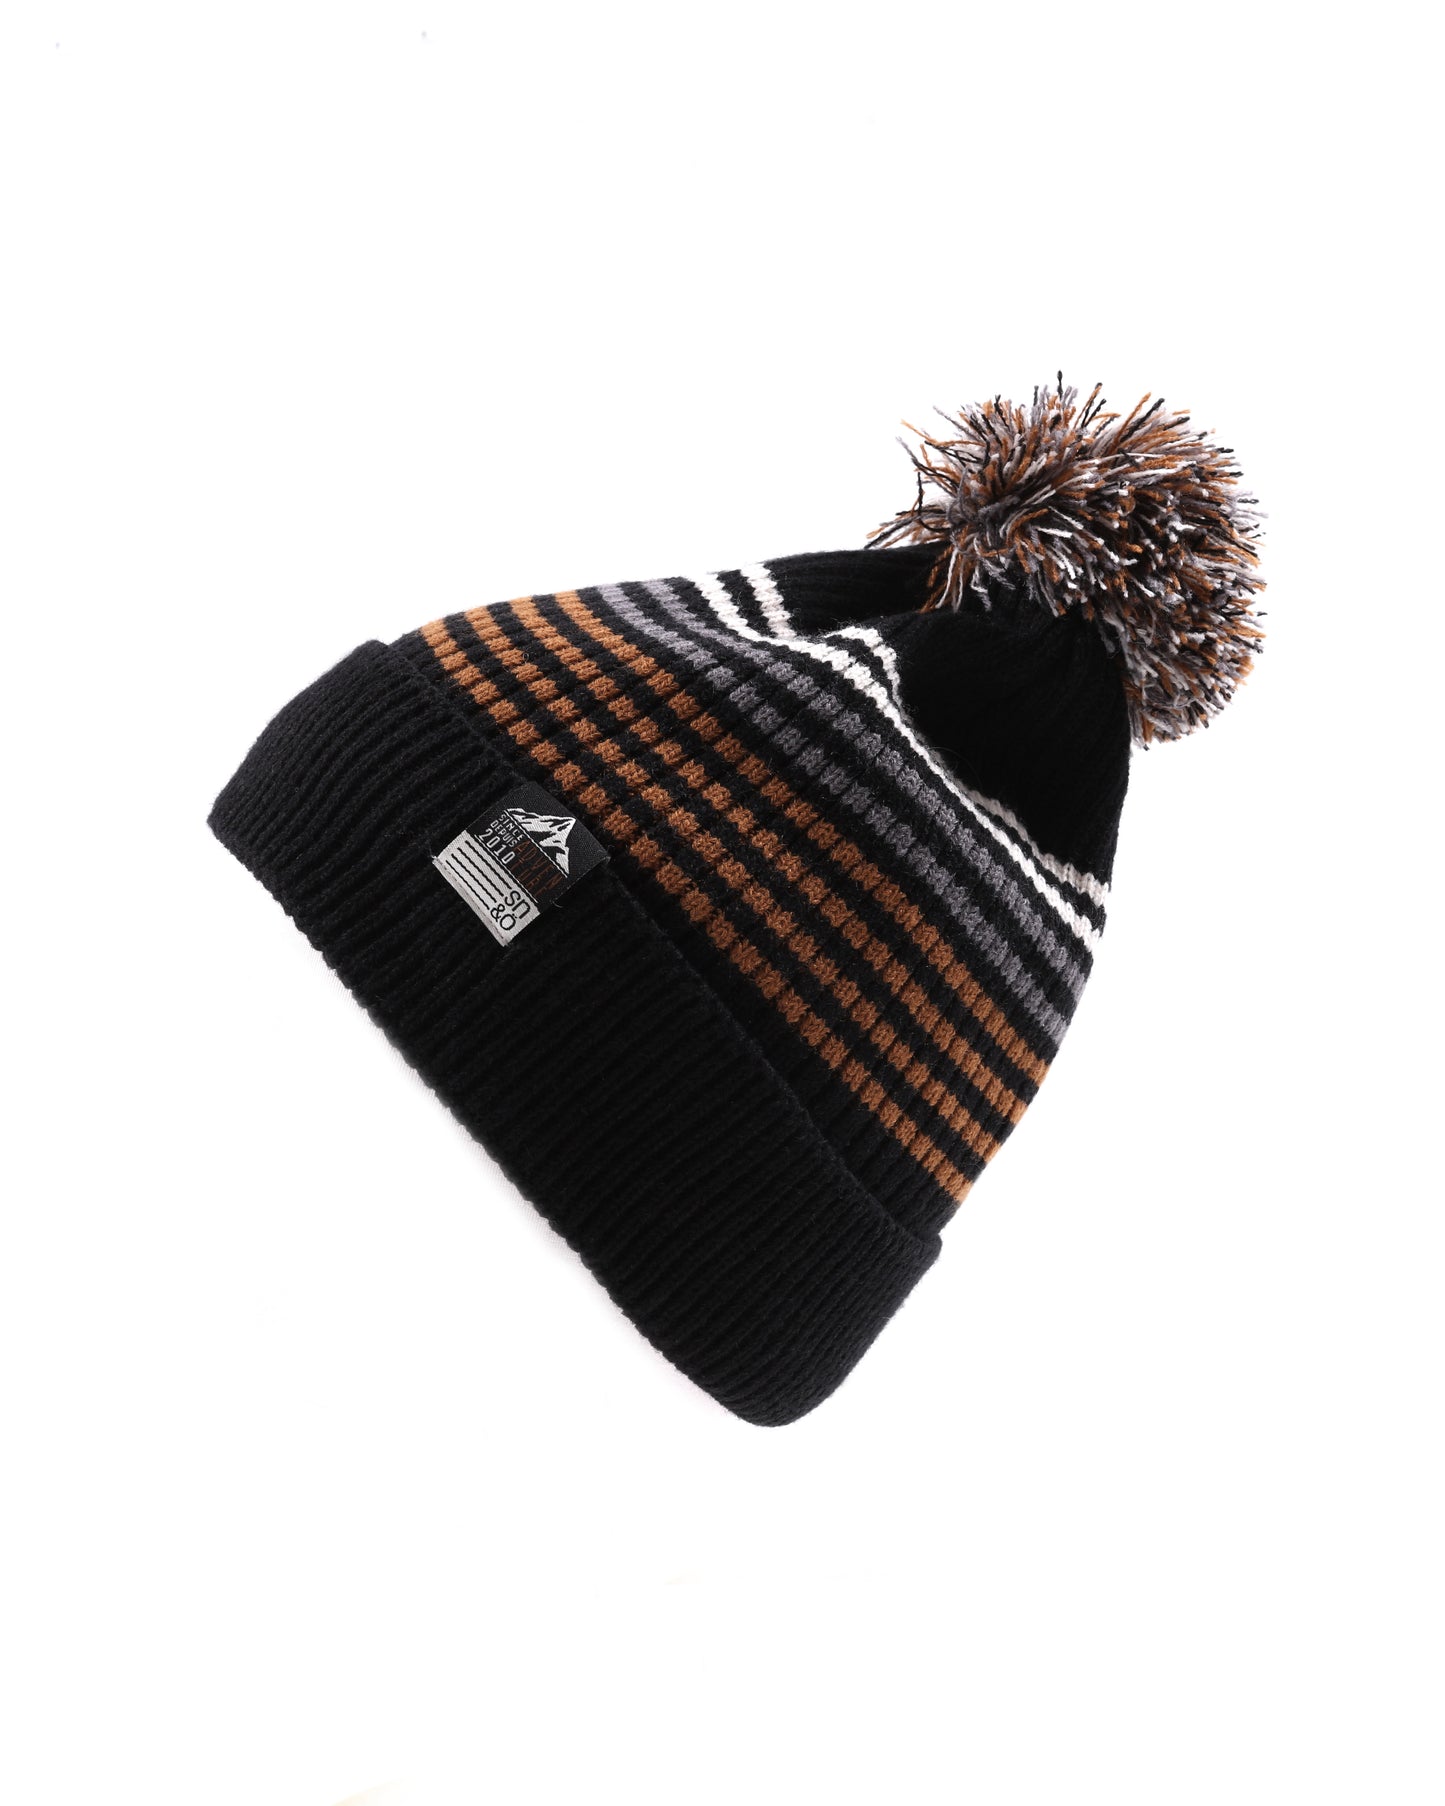 TUQUE TRICOT "SLALOM"